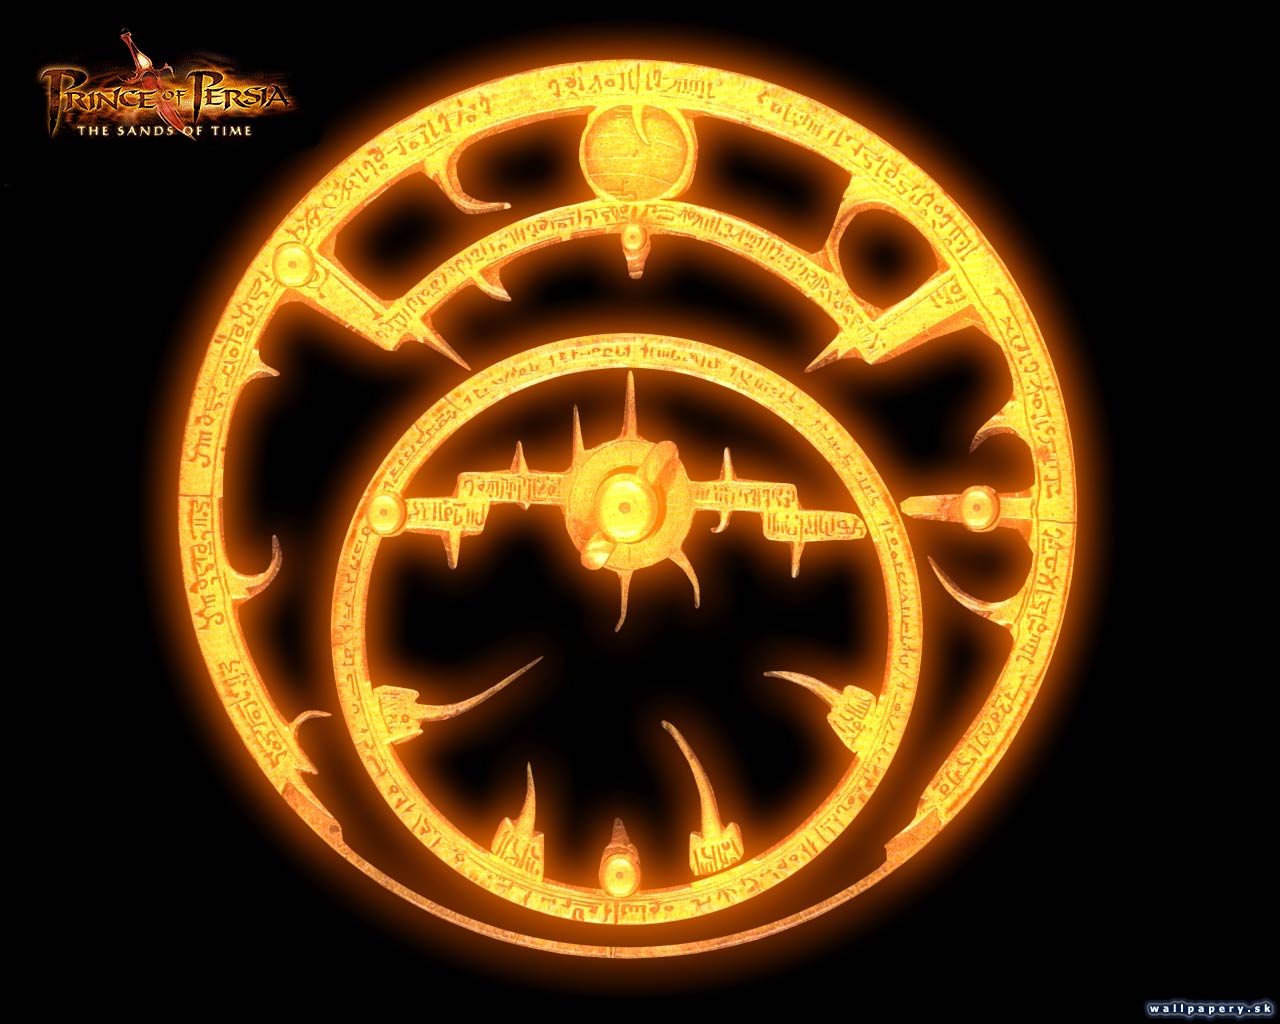 Prince of Persia: The Sands of Time - wallpaper 5